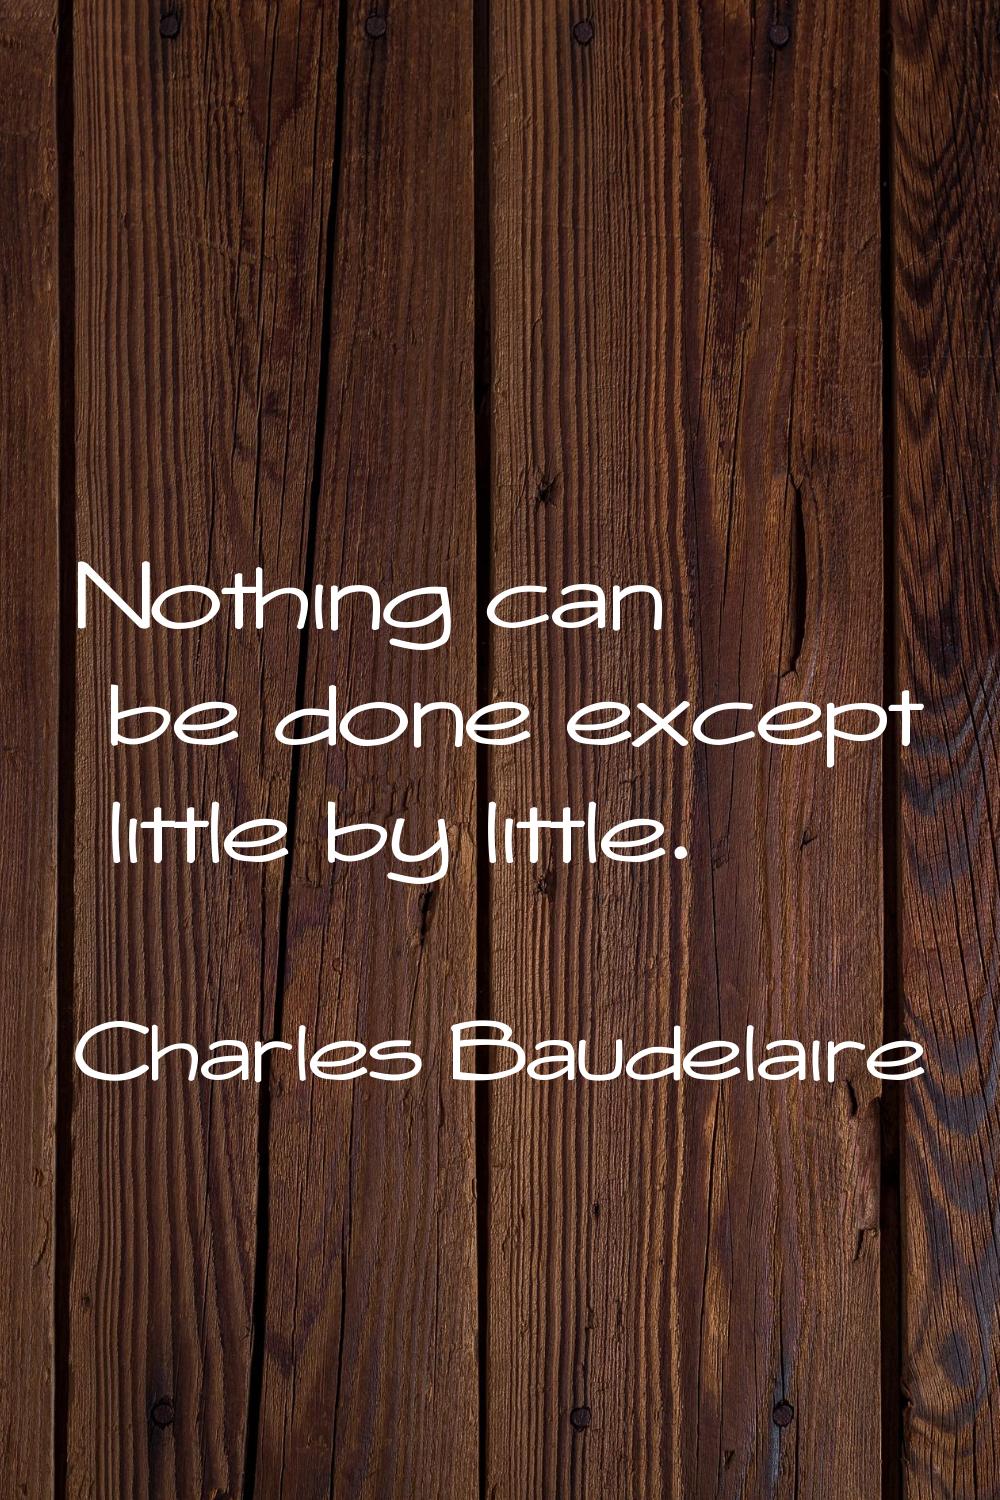 Nothing can be done except little by little.